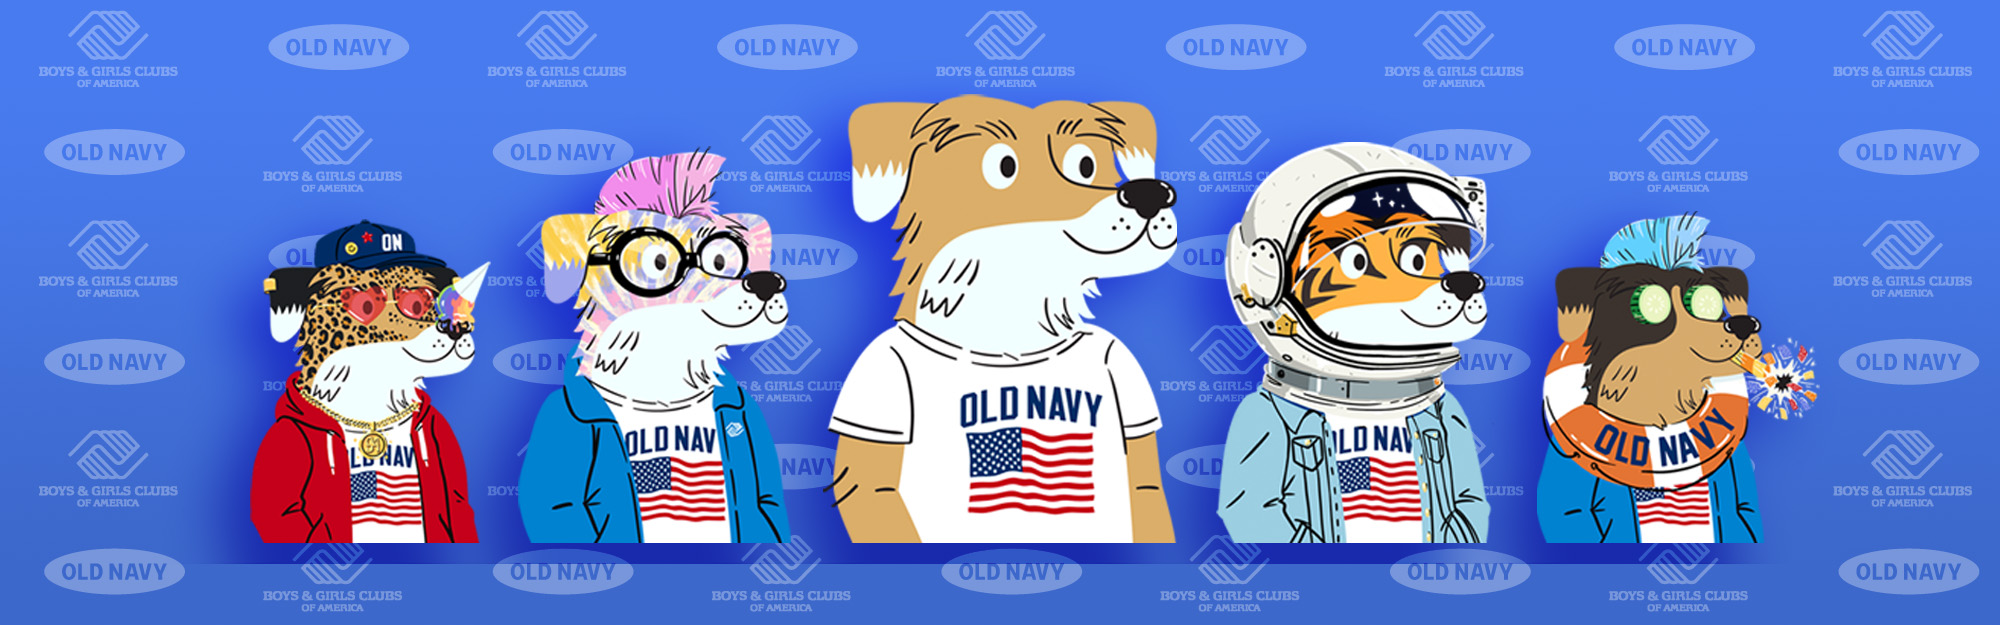 Old Navy Marketplace | Sweet - NFT Digital Collectibles